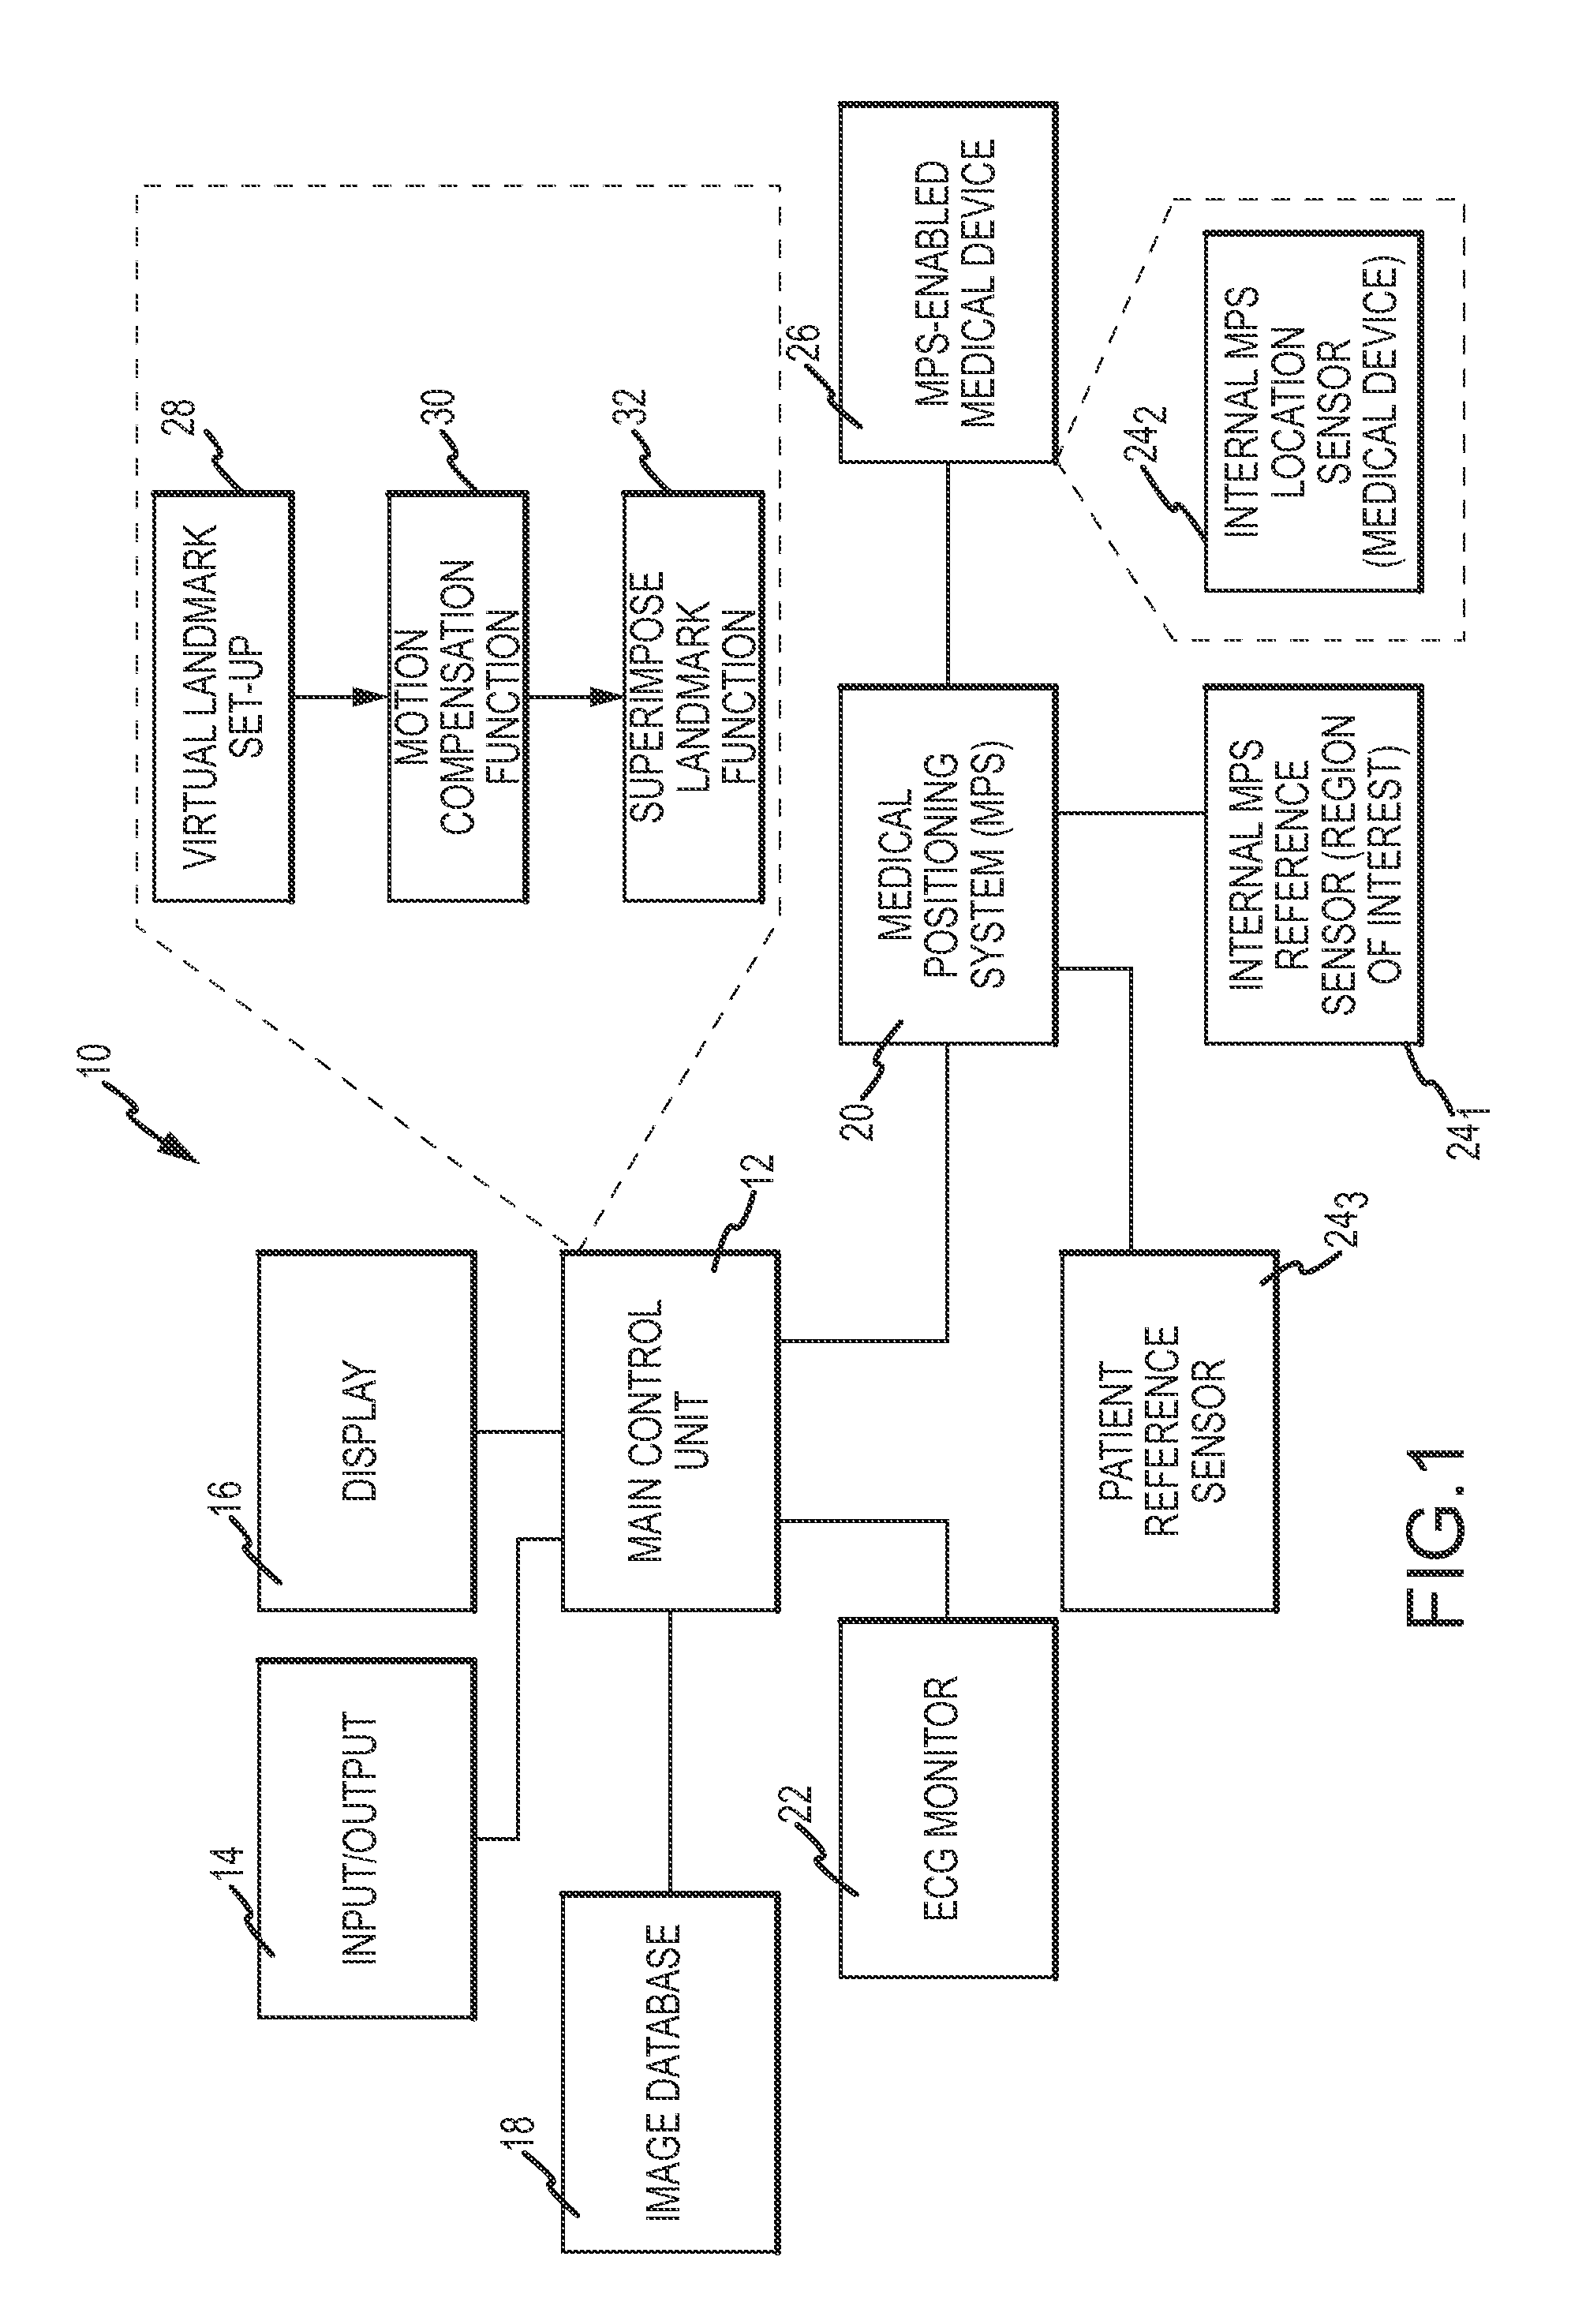 Method and system for superimposing virtual anatomical landmarks on an image